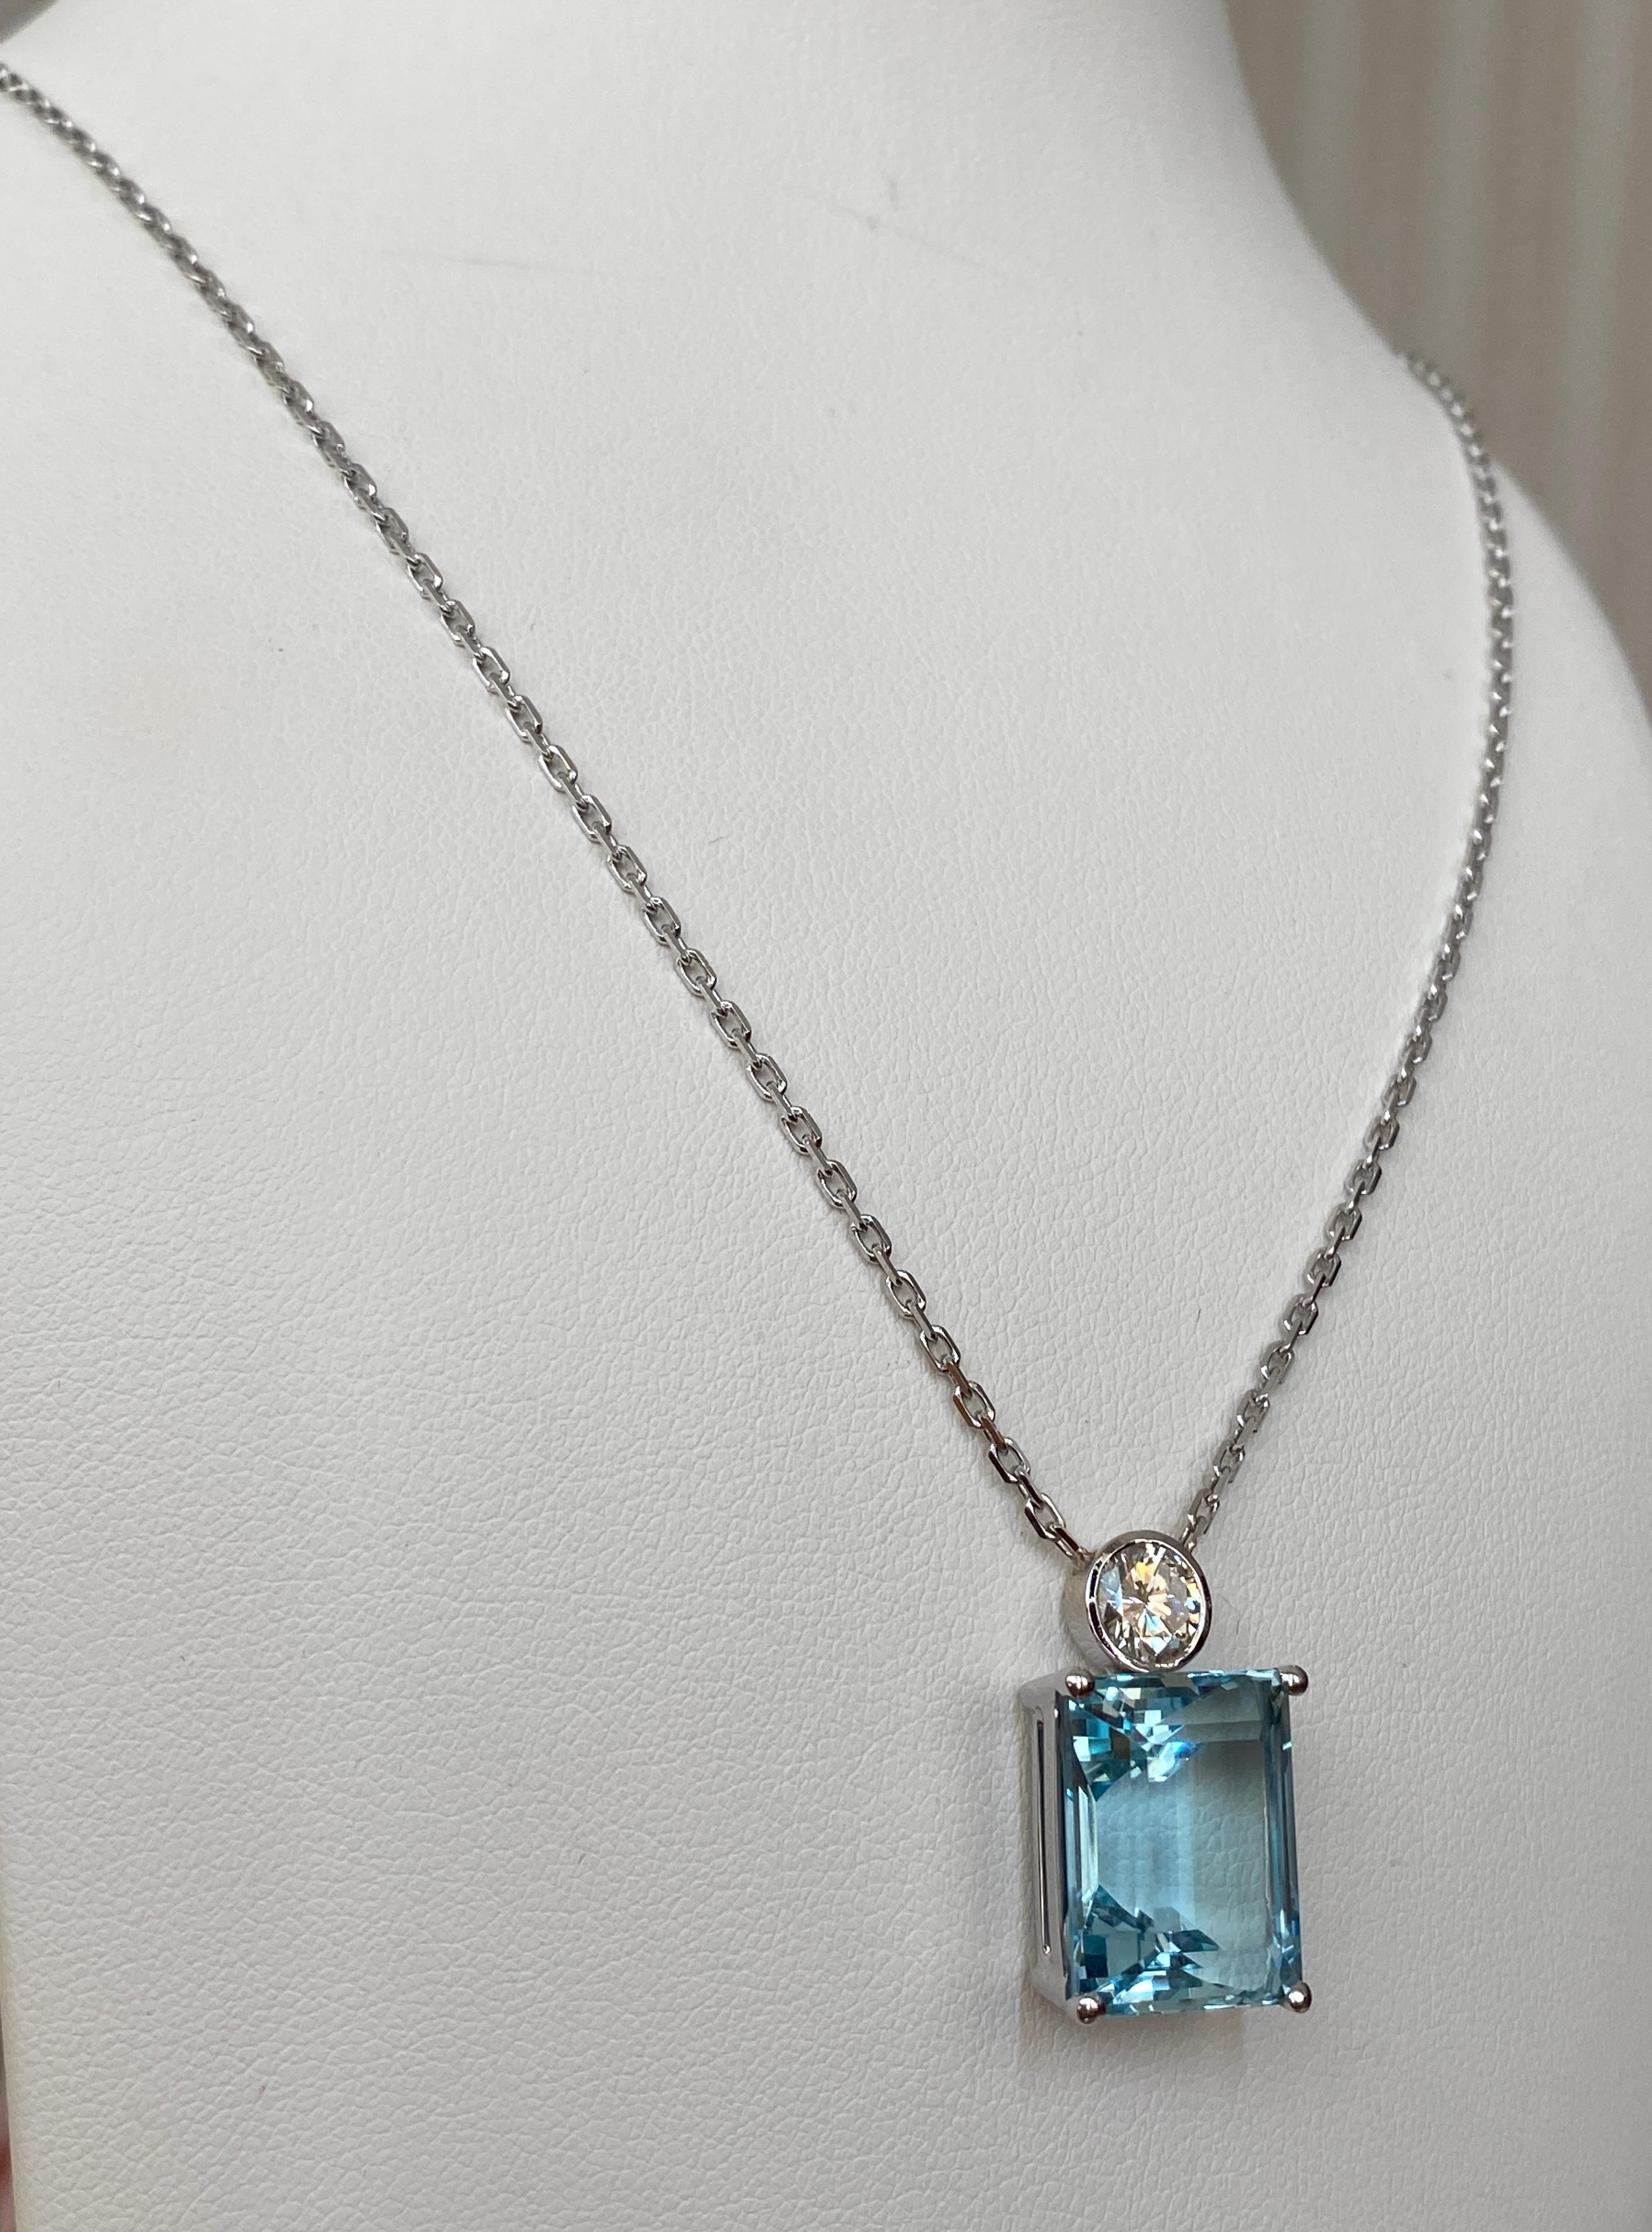 Emerald Cut 18 Karat White Gold Necklace with a Diamond Pendant Decorated with Aquamarine  For Sale